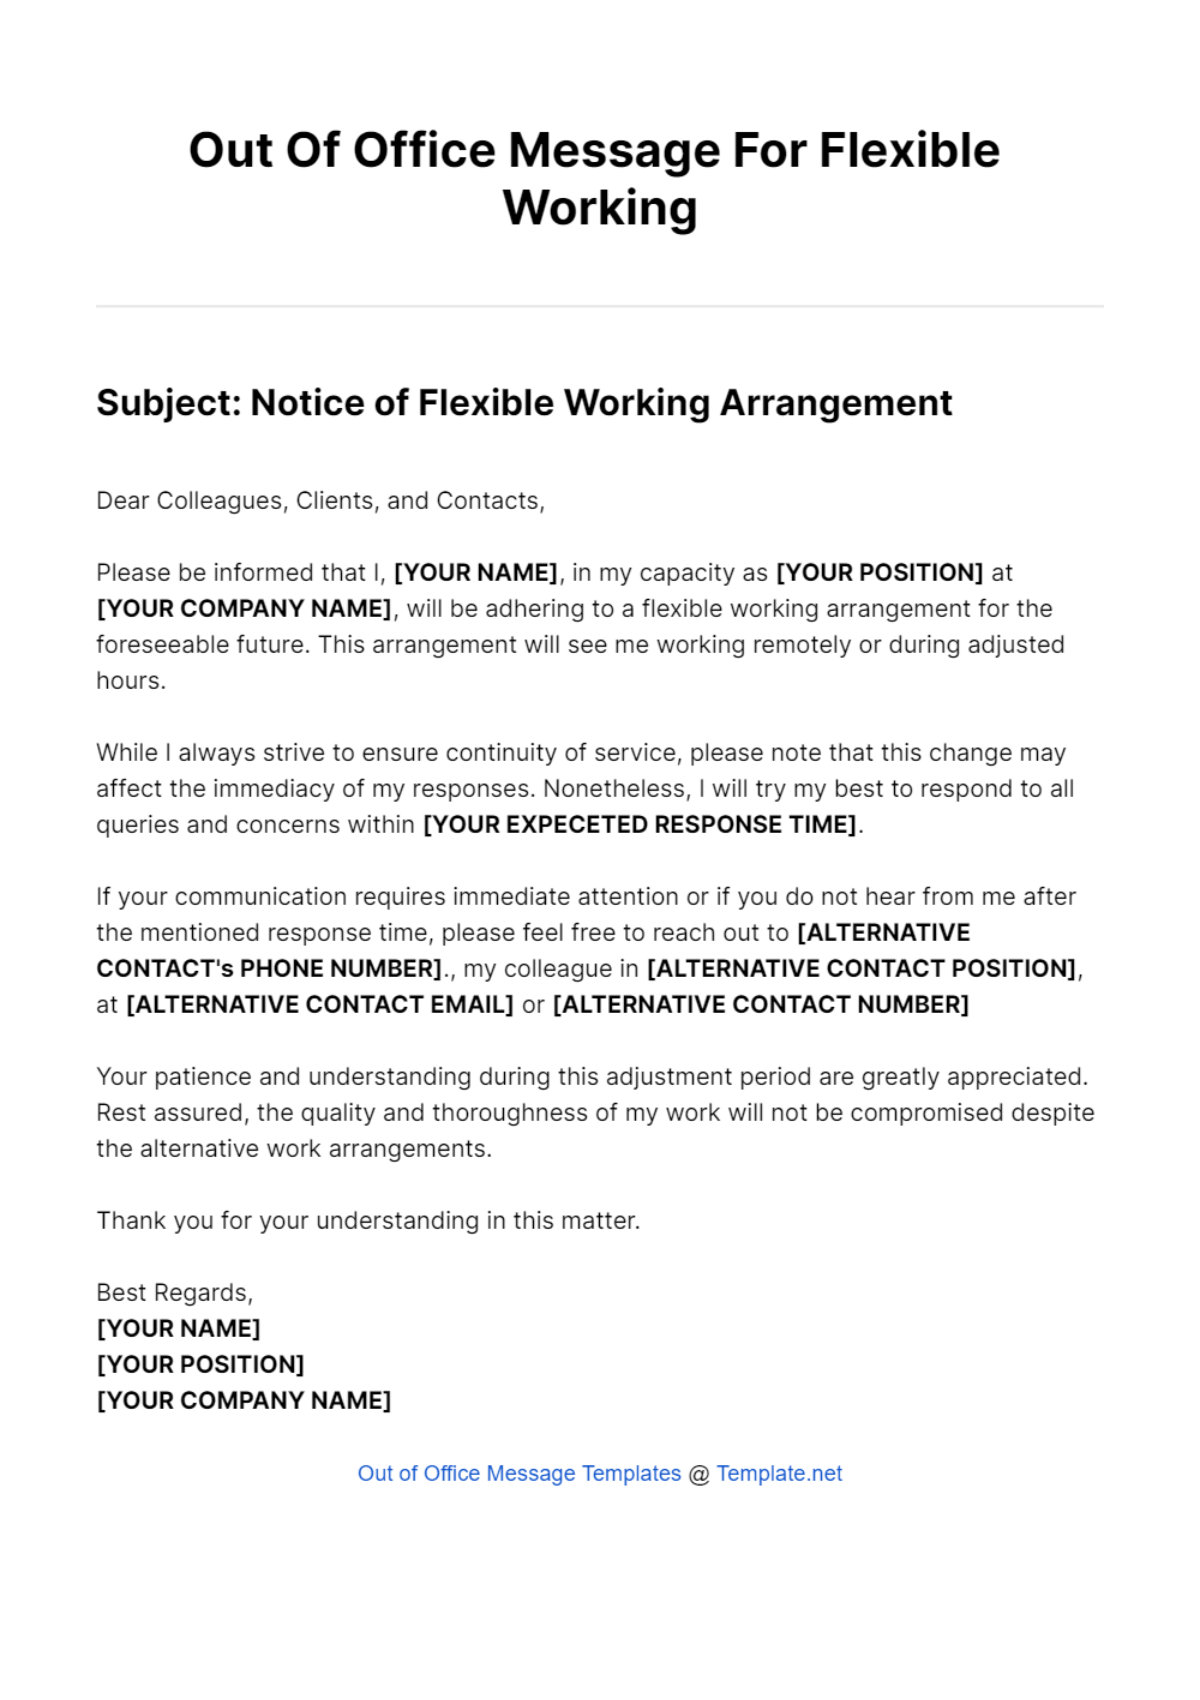 Out Of Office Message For Flexible Working Template